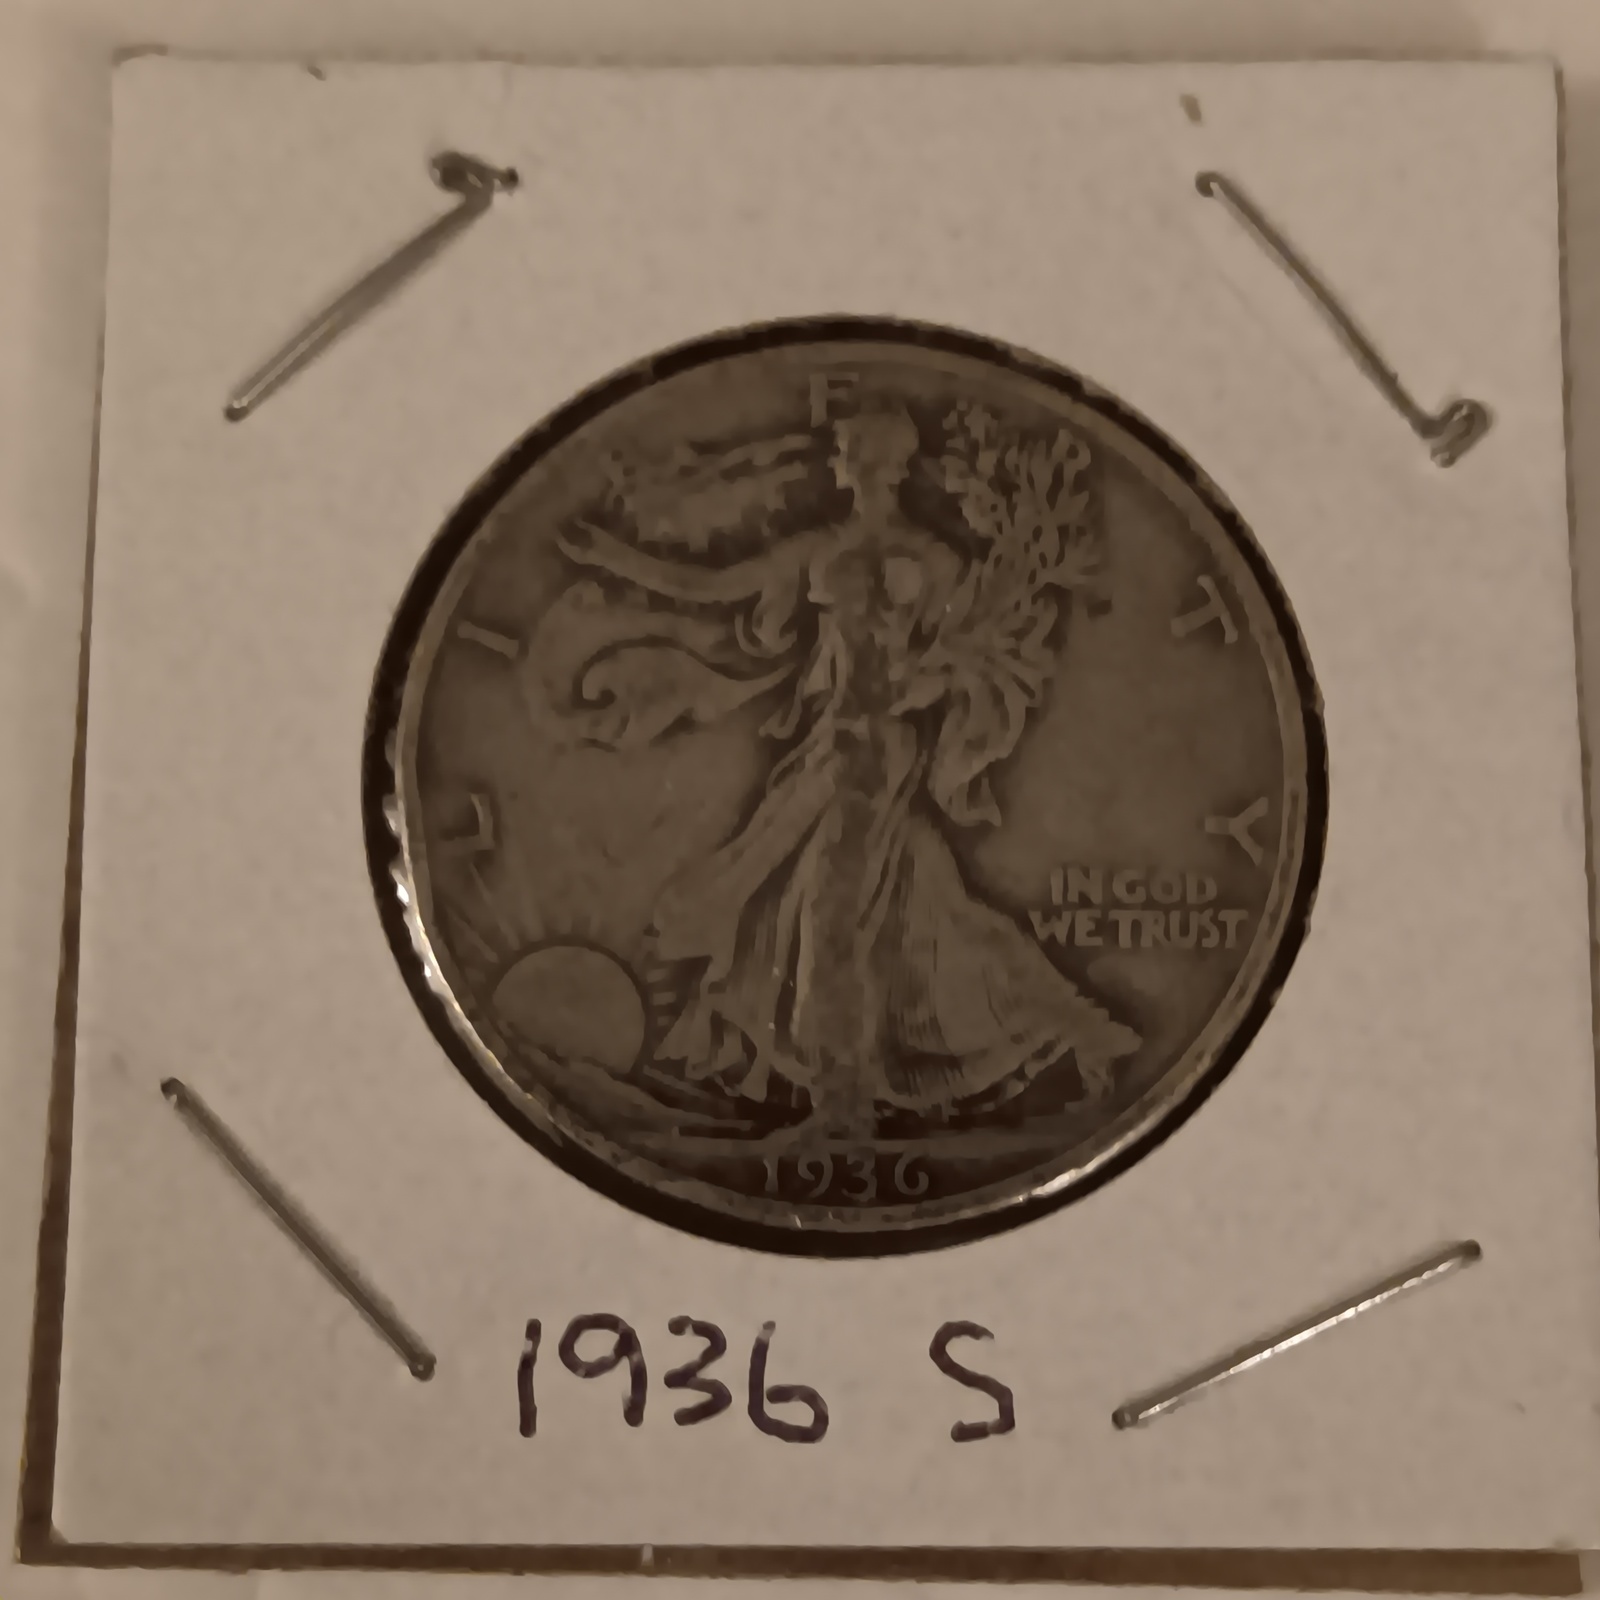 Primary image for 1936 S Walking Liberty Half Dollar Very Good + Condition US Mint San Francisco